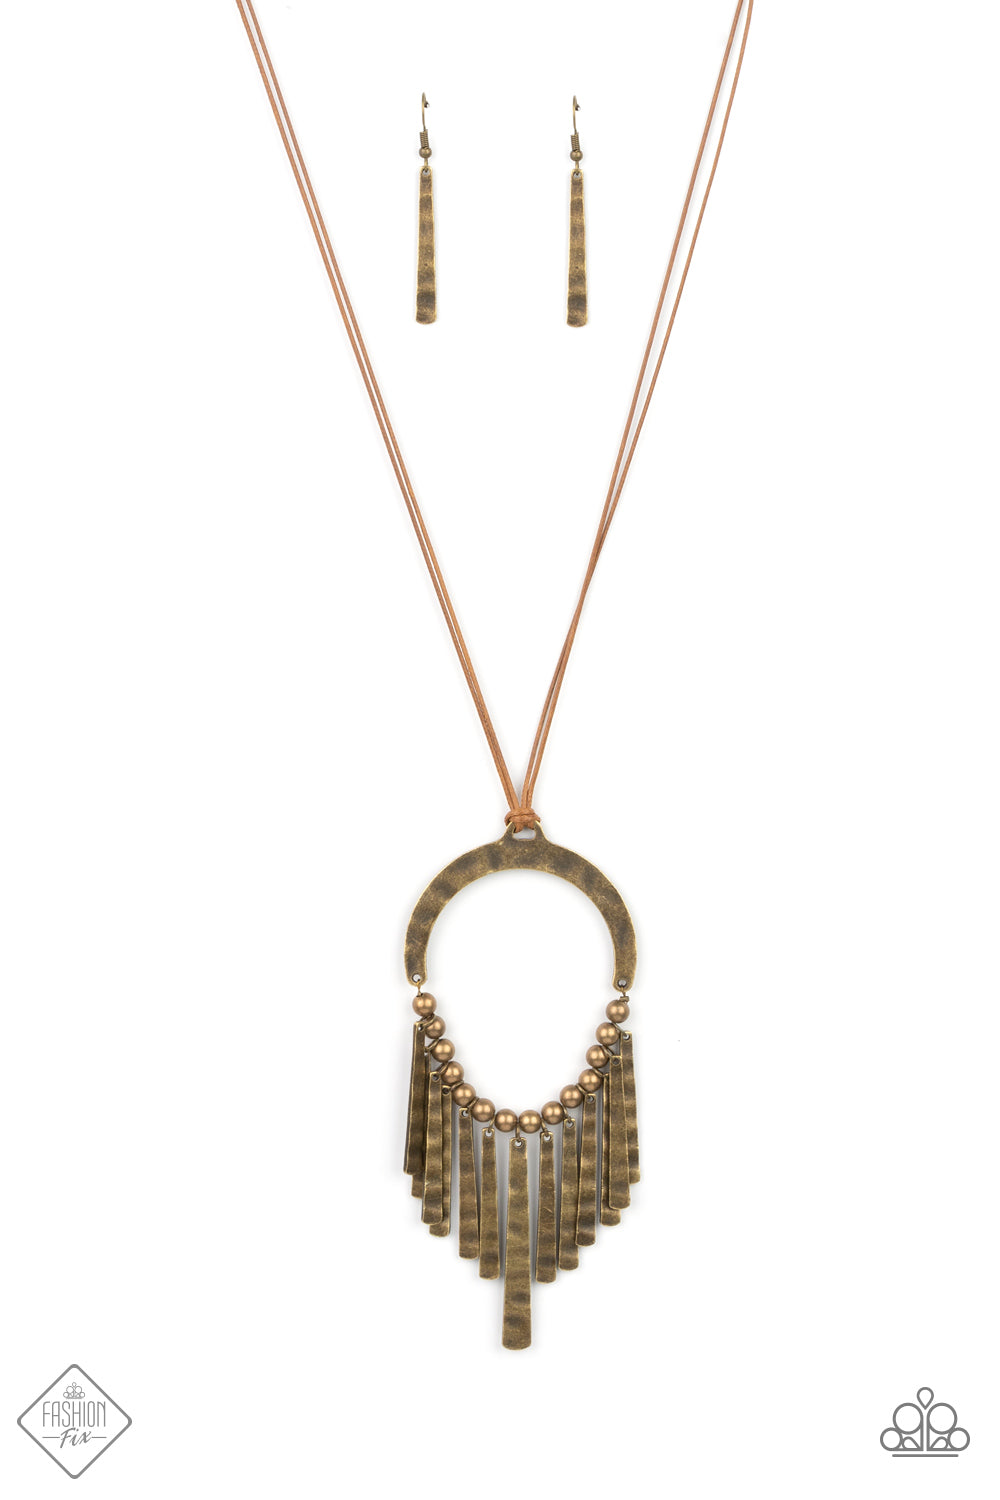 You Wouldnt FLARE!
Brass Necklace - Daria's Blings N Things